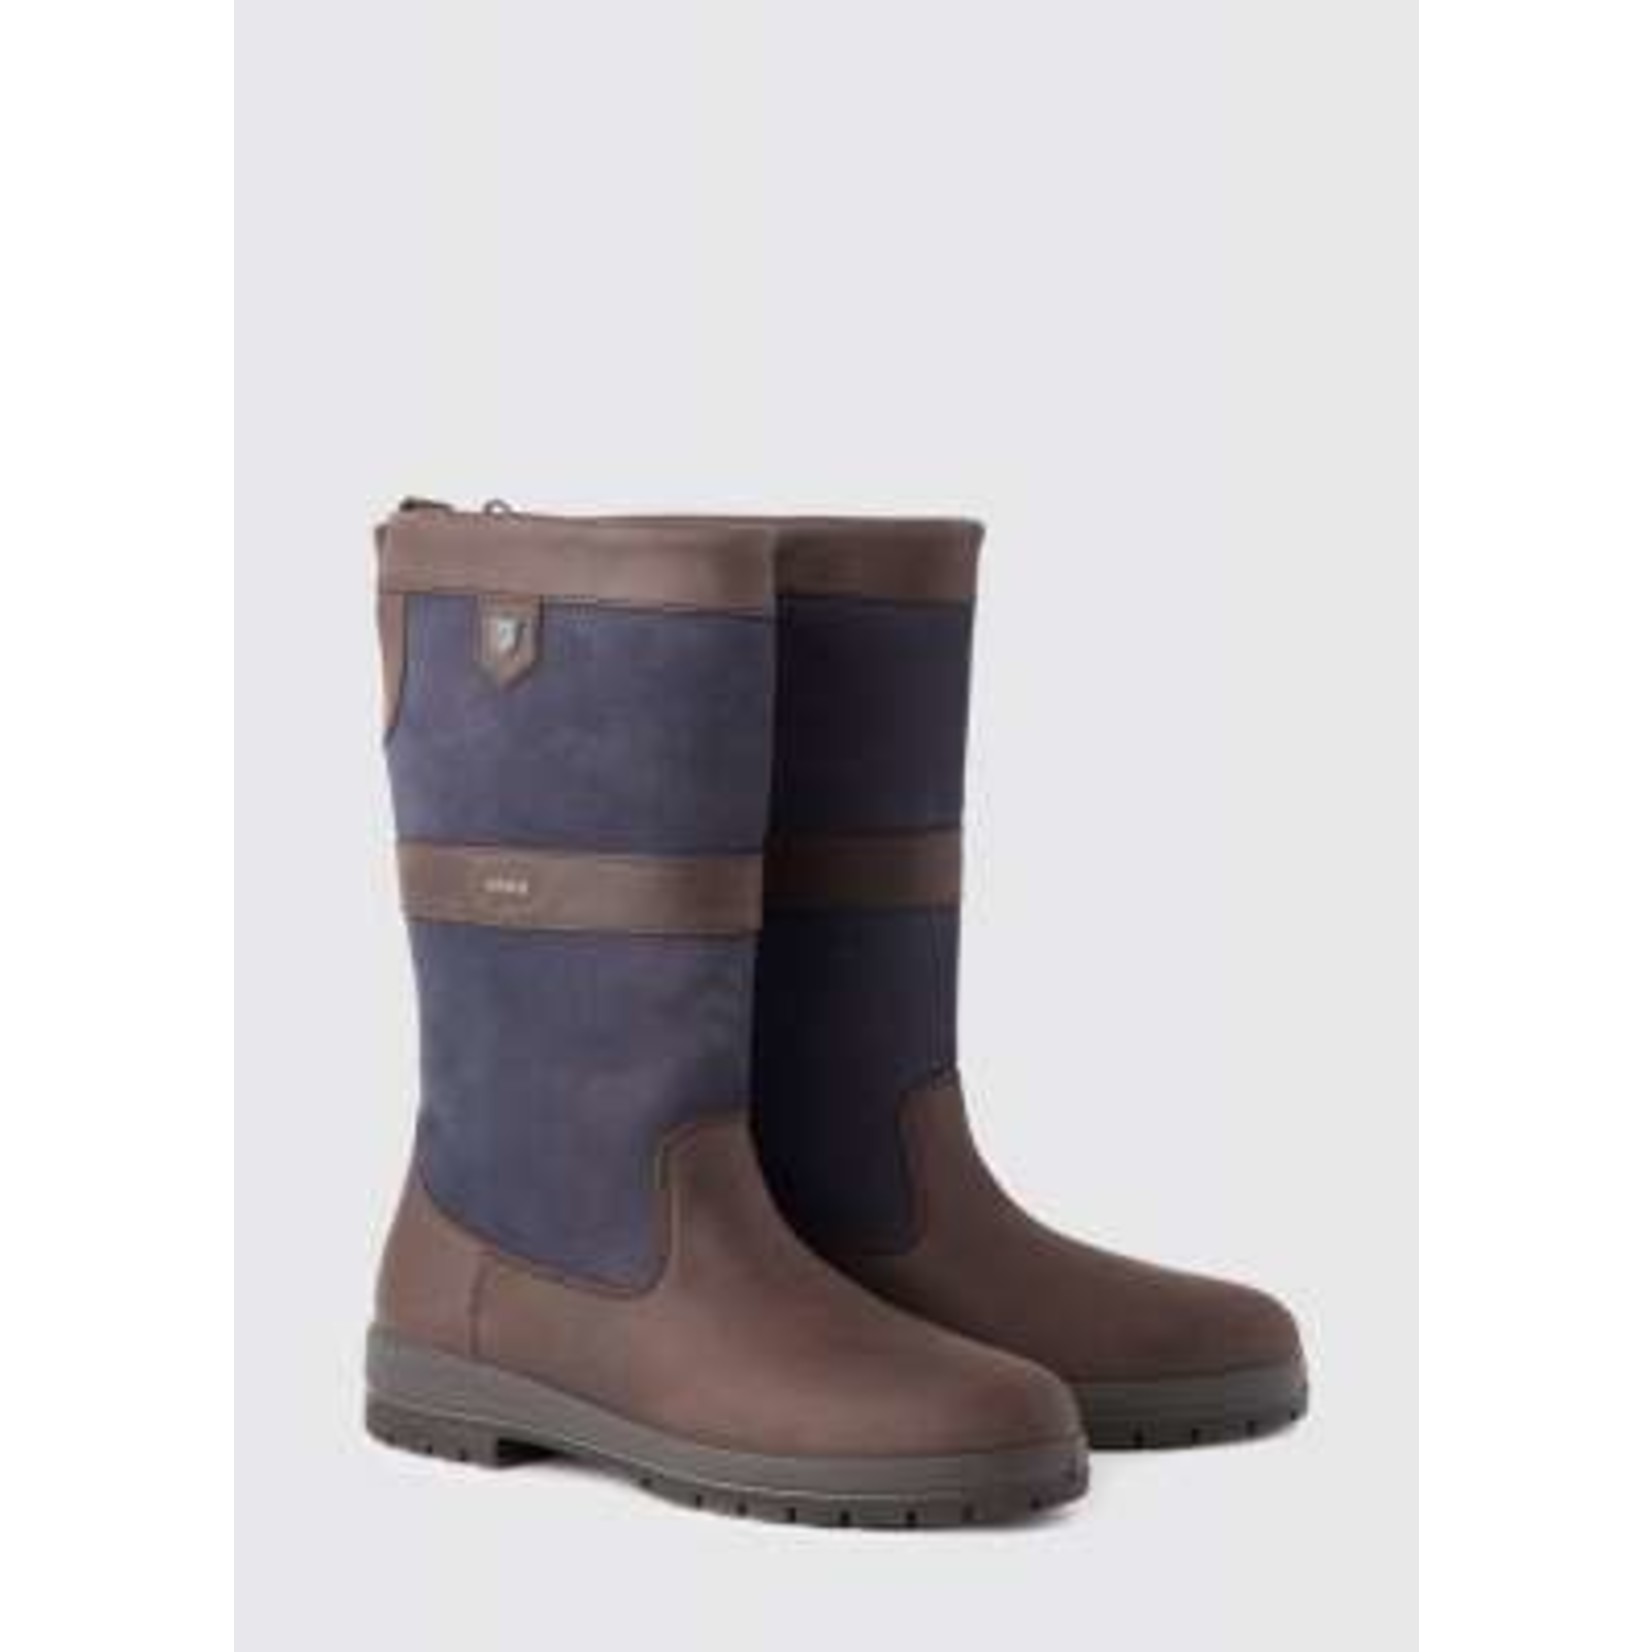 Dubarry of Ireland Kildare Country Boot in Navy/Brown